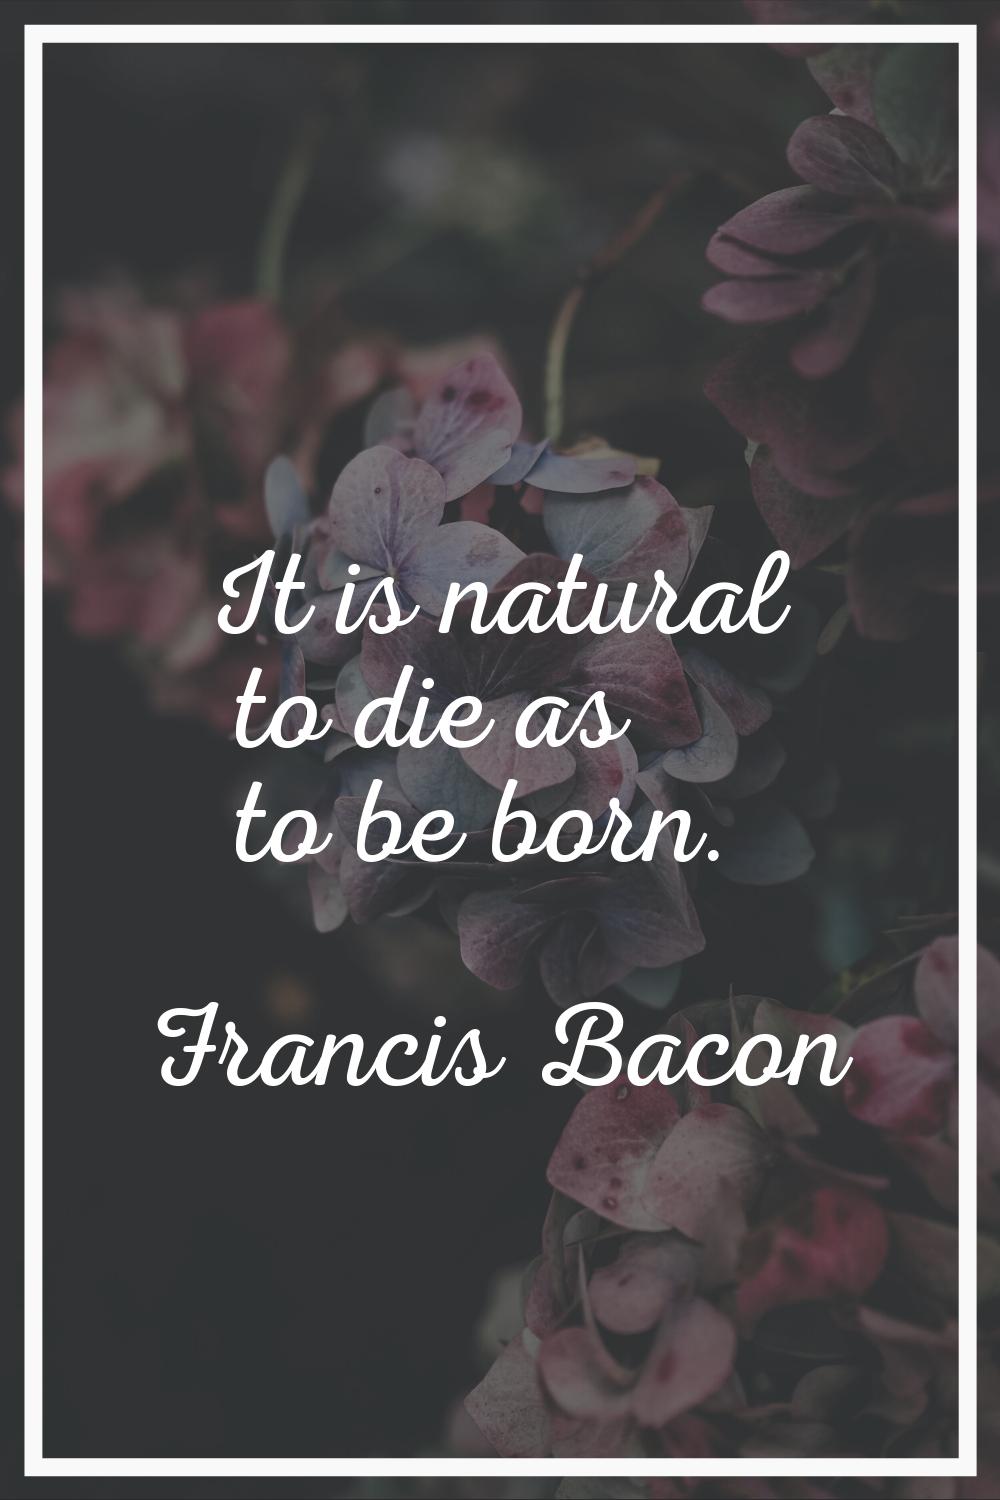 It is natural to die as to be born.